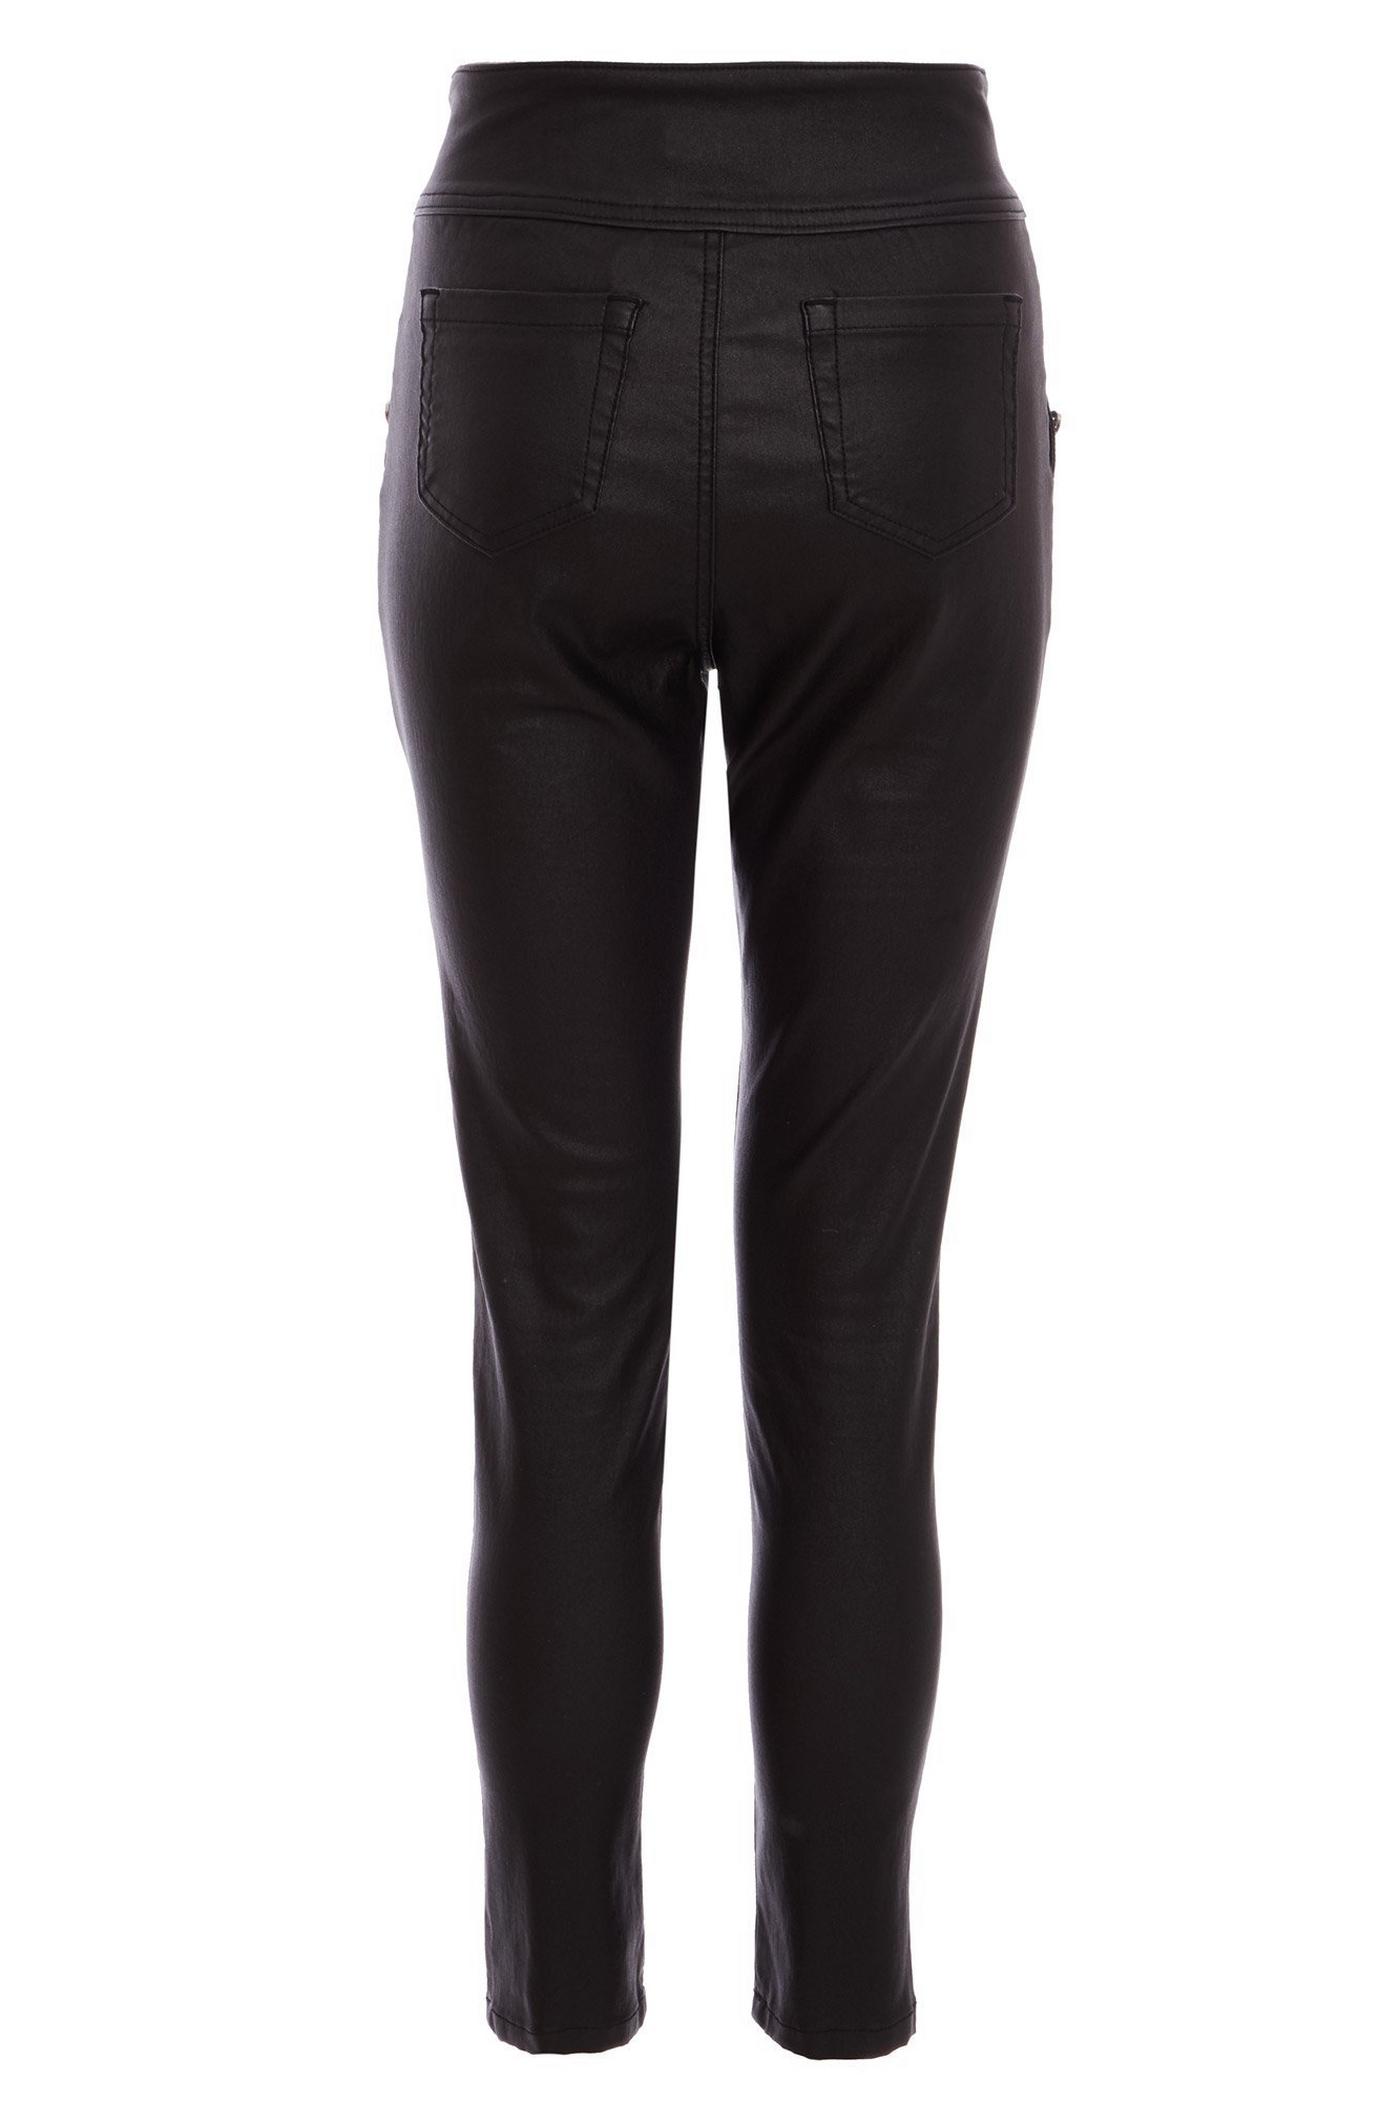 Black High Waisted Button Skinny Jeans